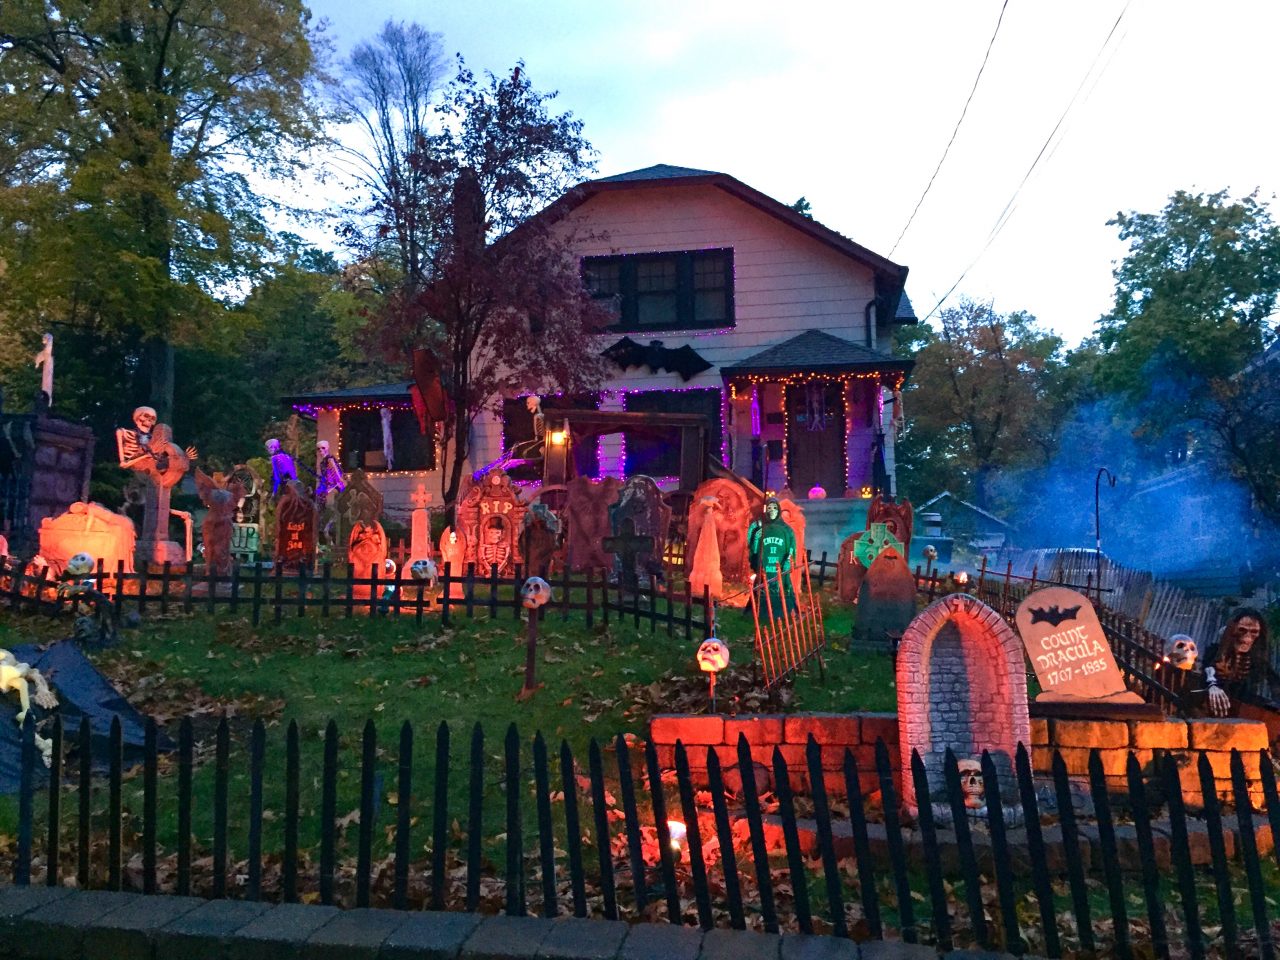 If you’re out and about, check out this house on Park Avenue between